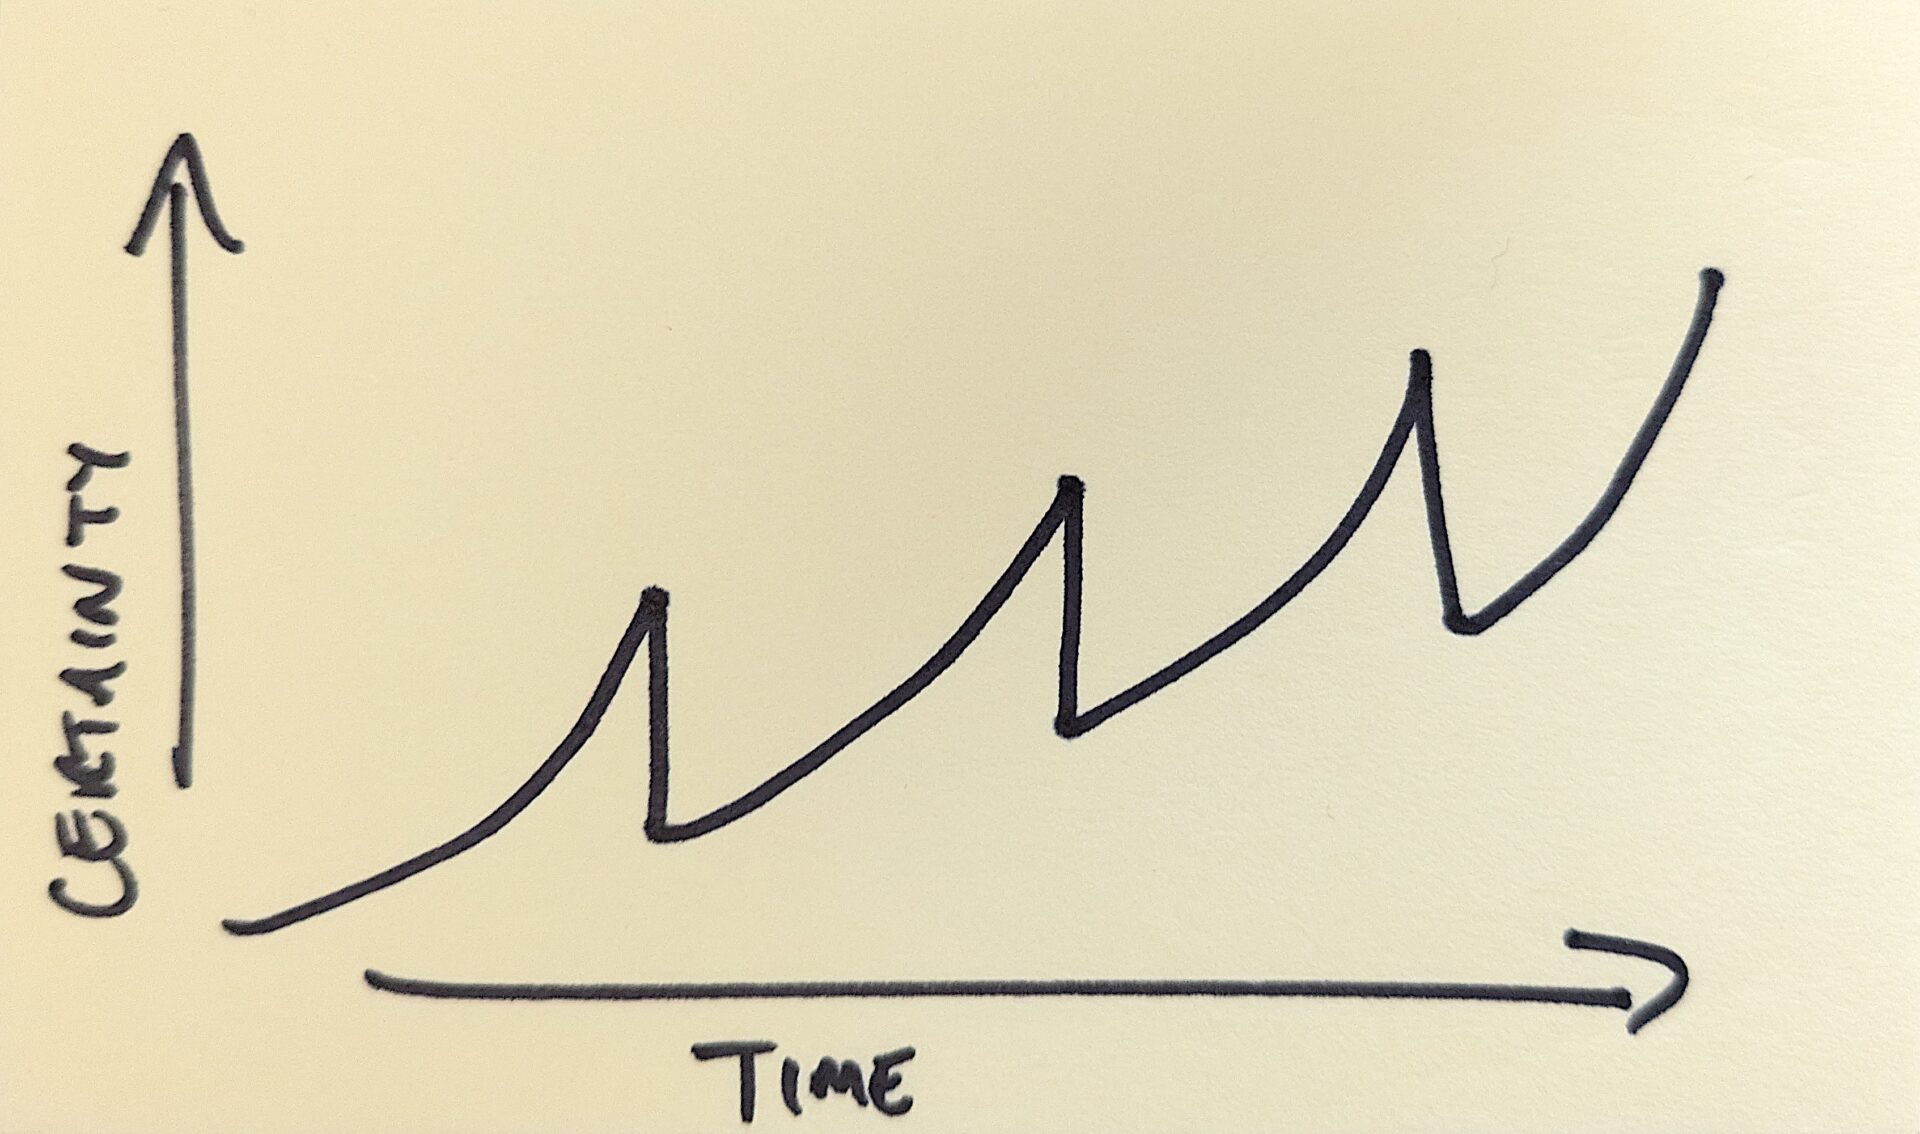 Sawtooth-shaped graph of rising certainty over time